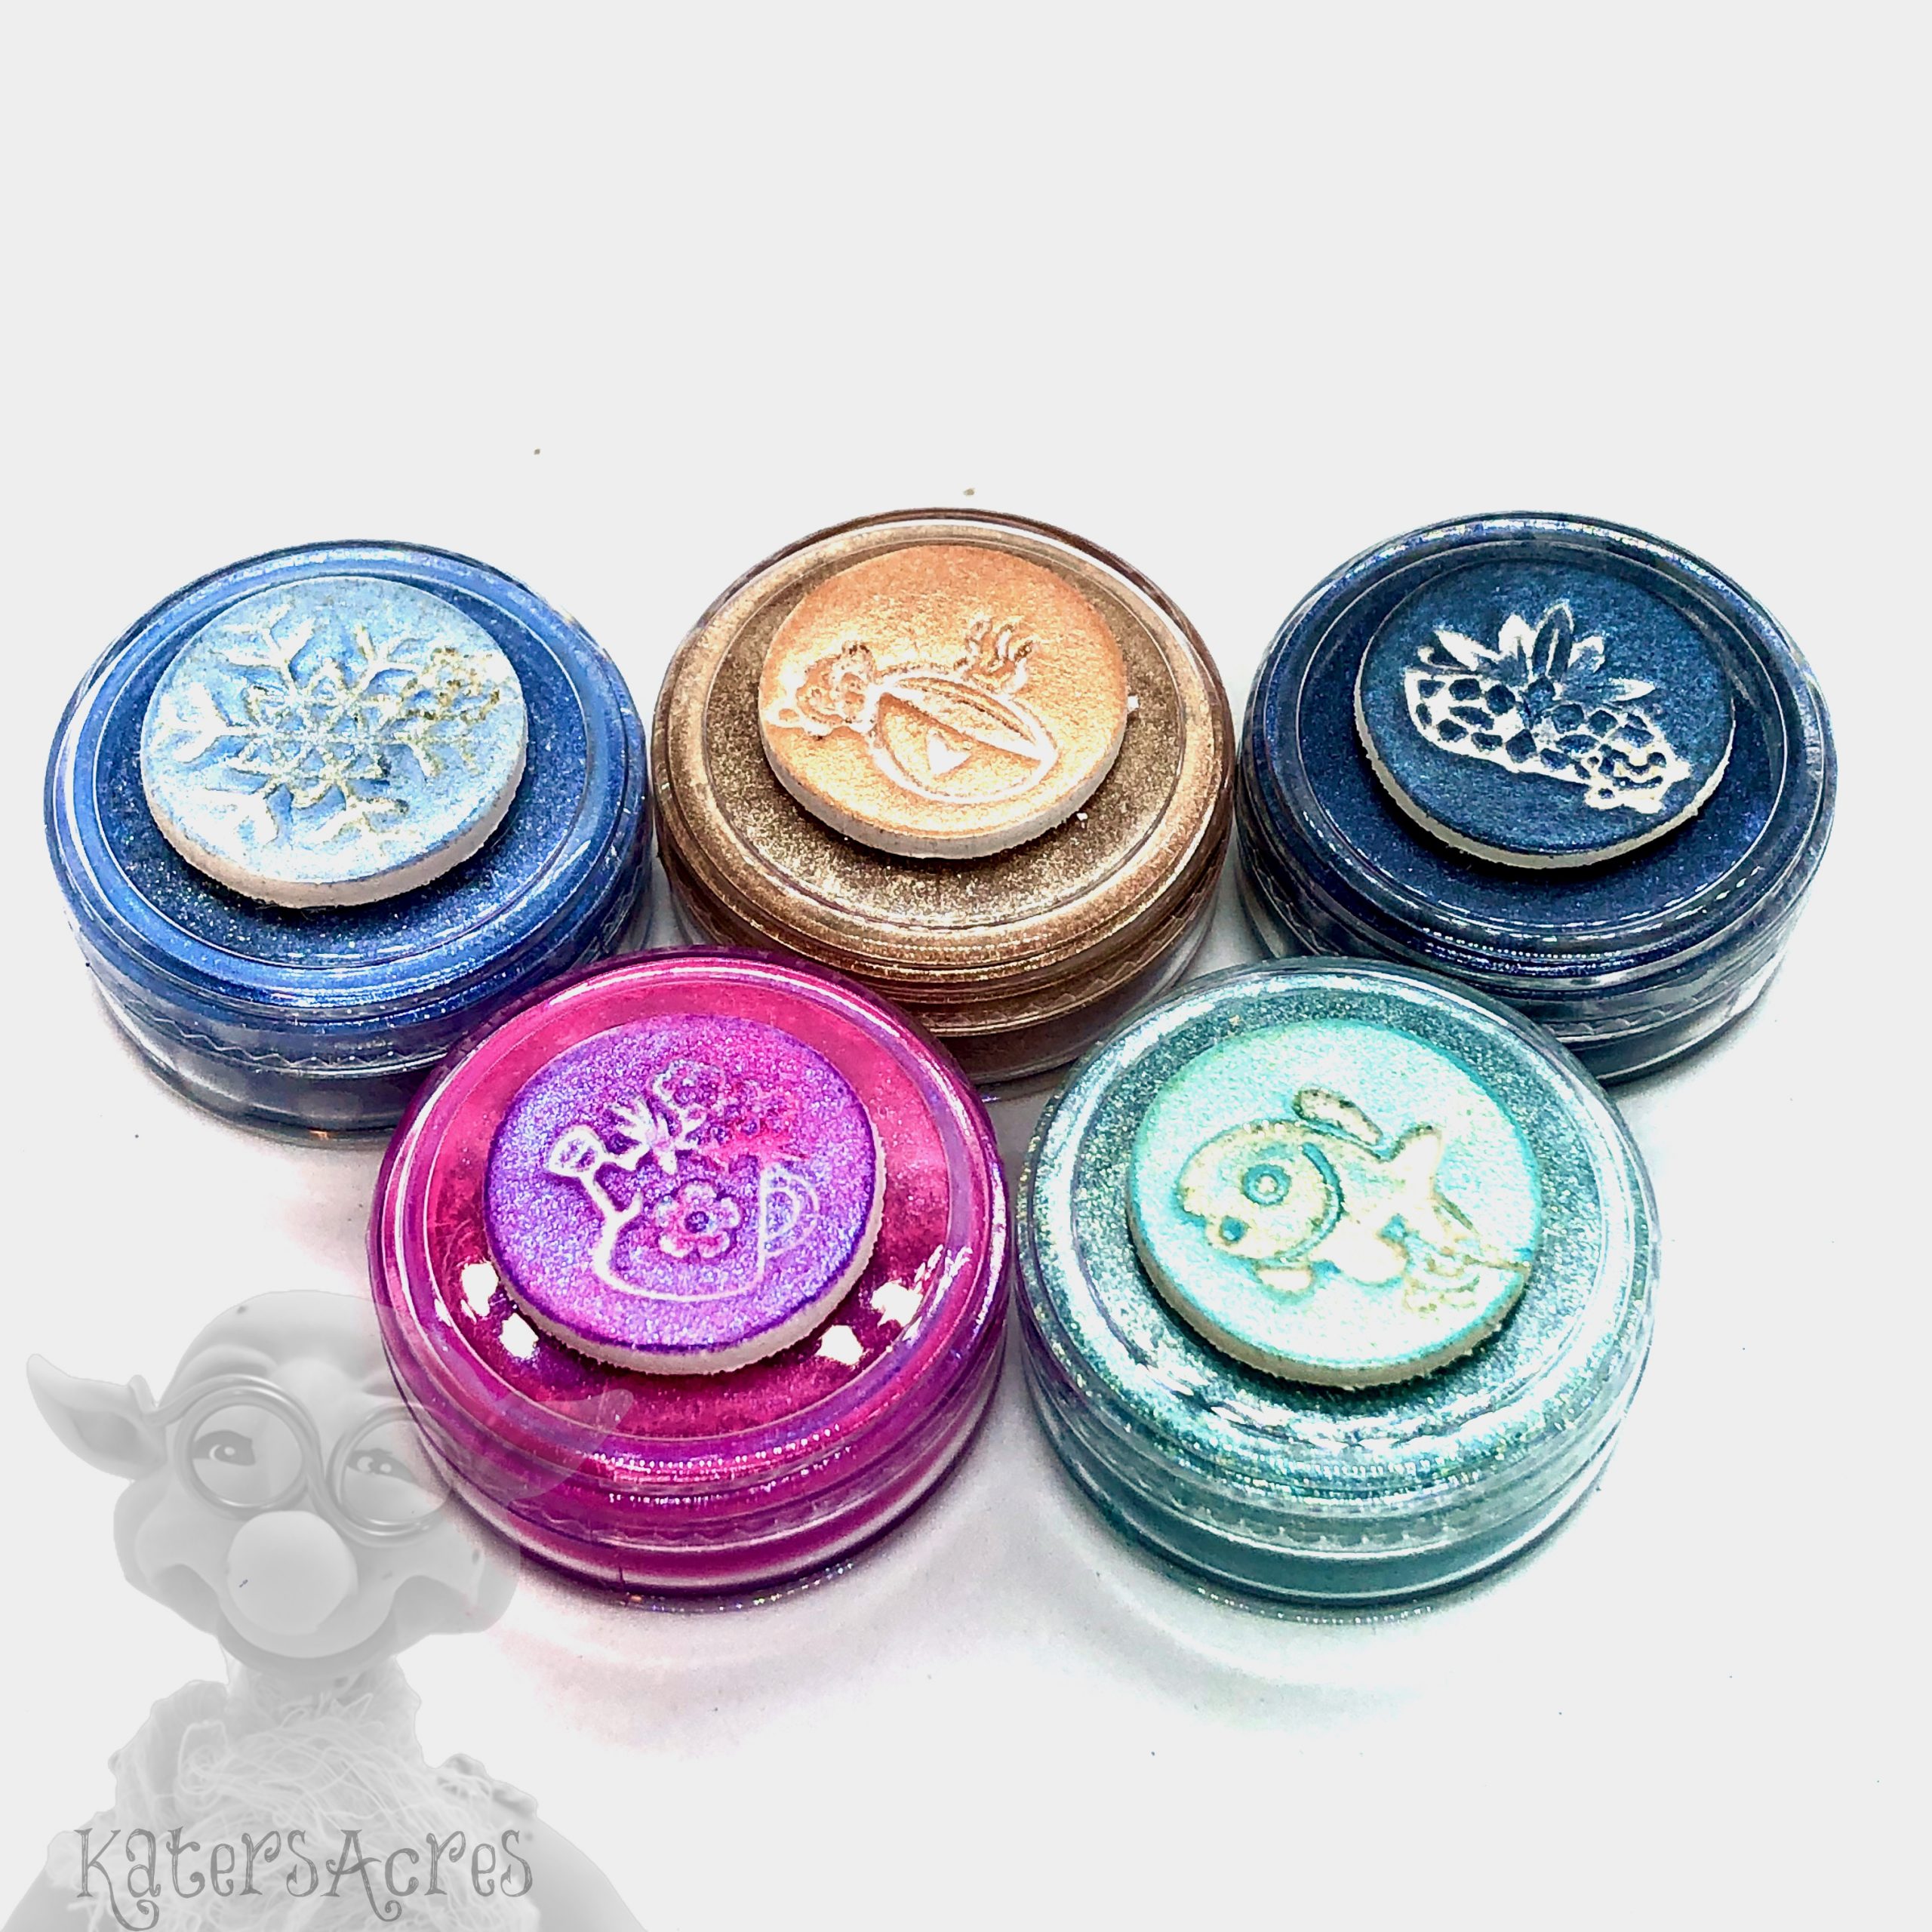 Glitz Series Mica Powders from Kater's Acres